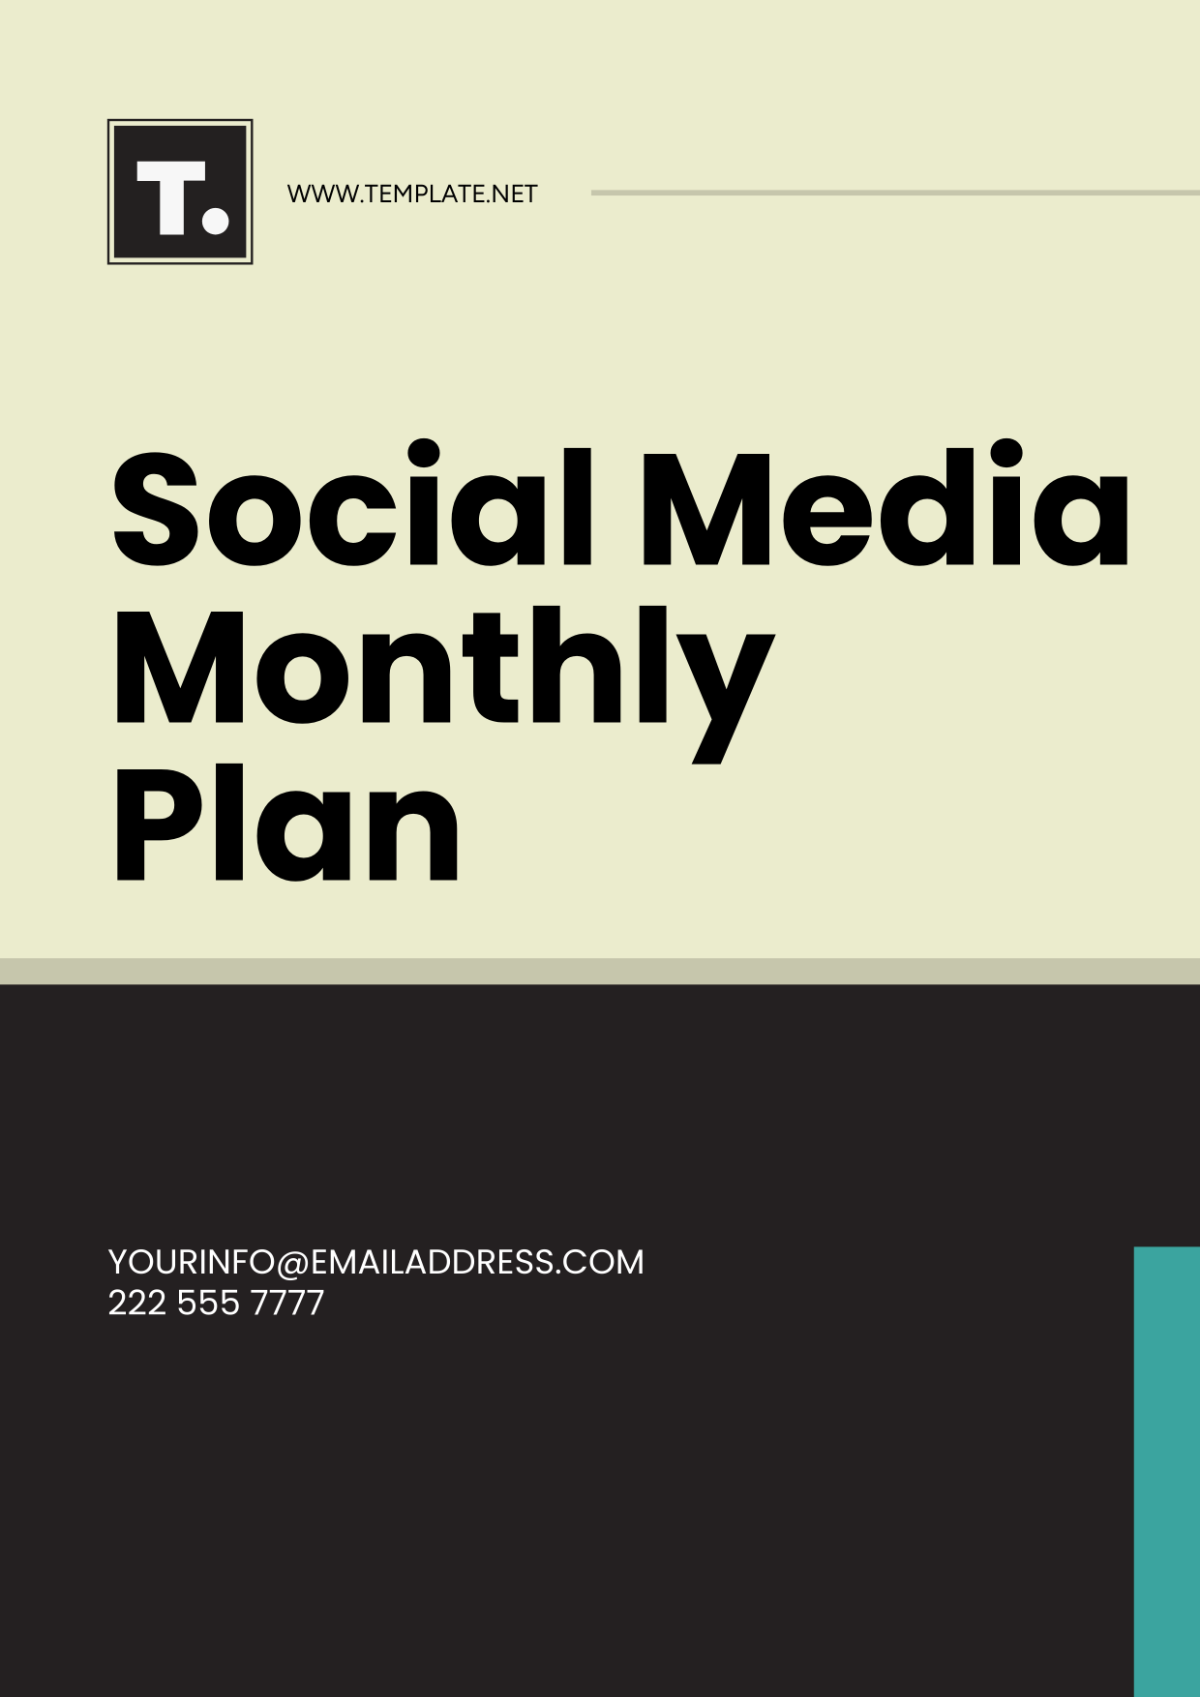 Social Media Monthly Plan Template